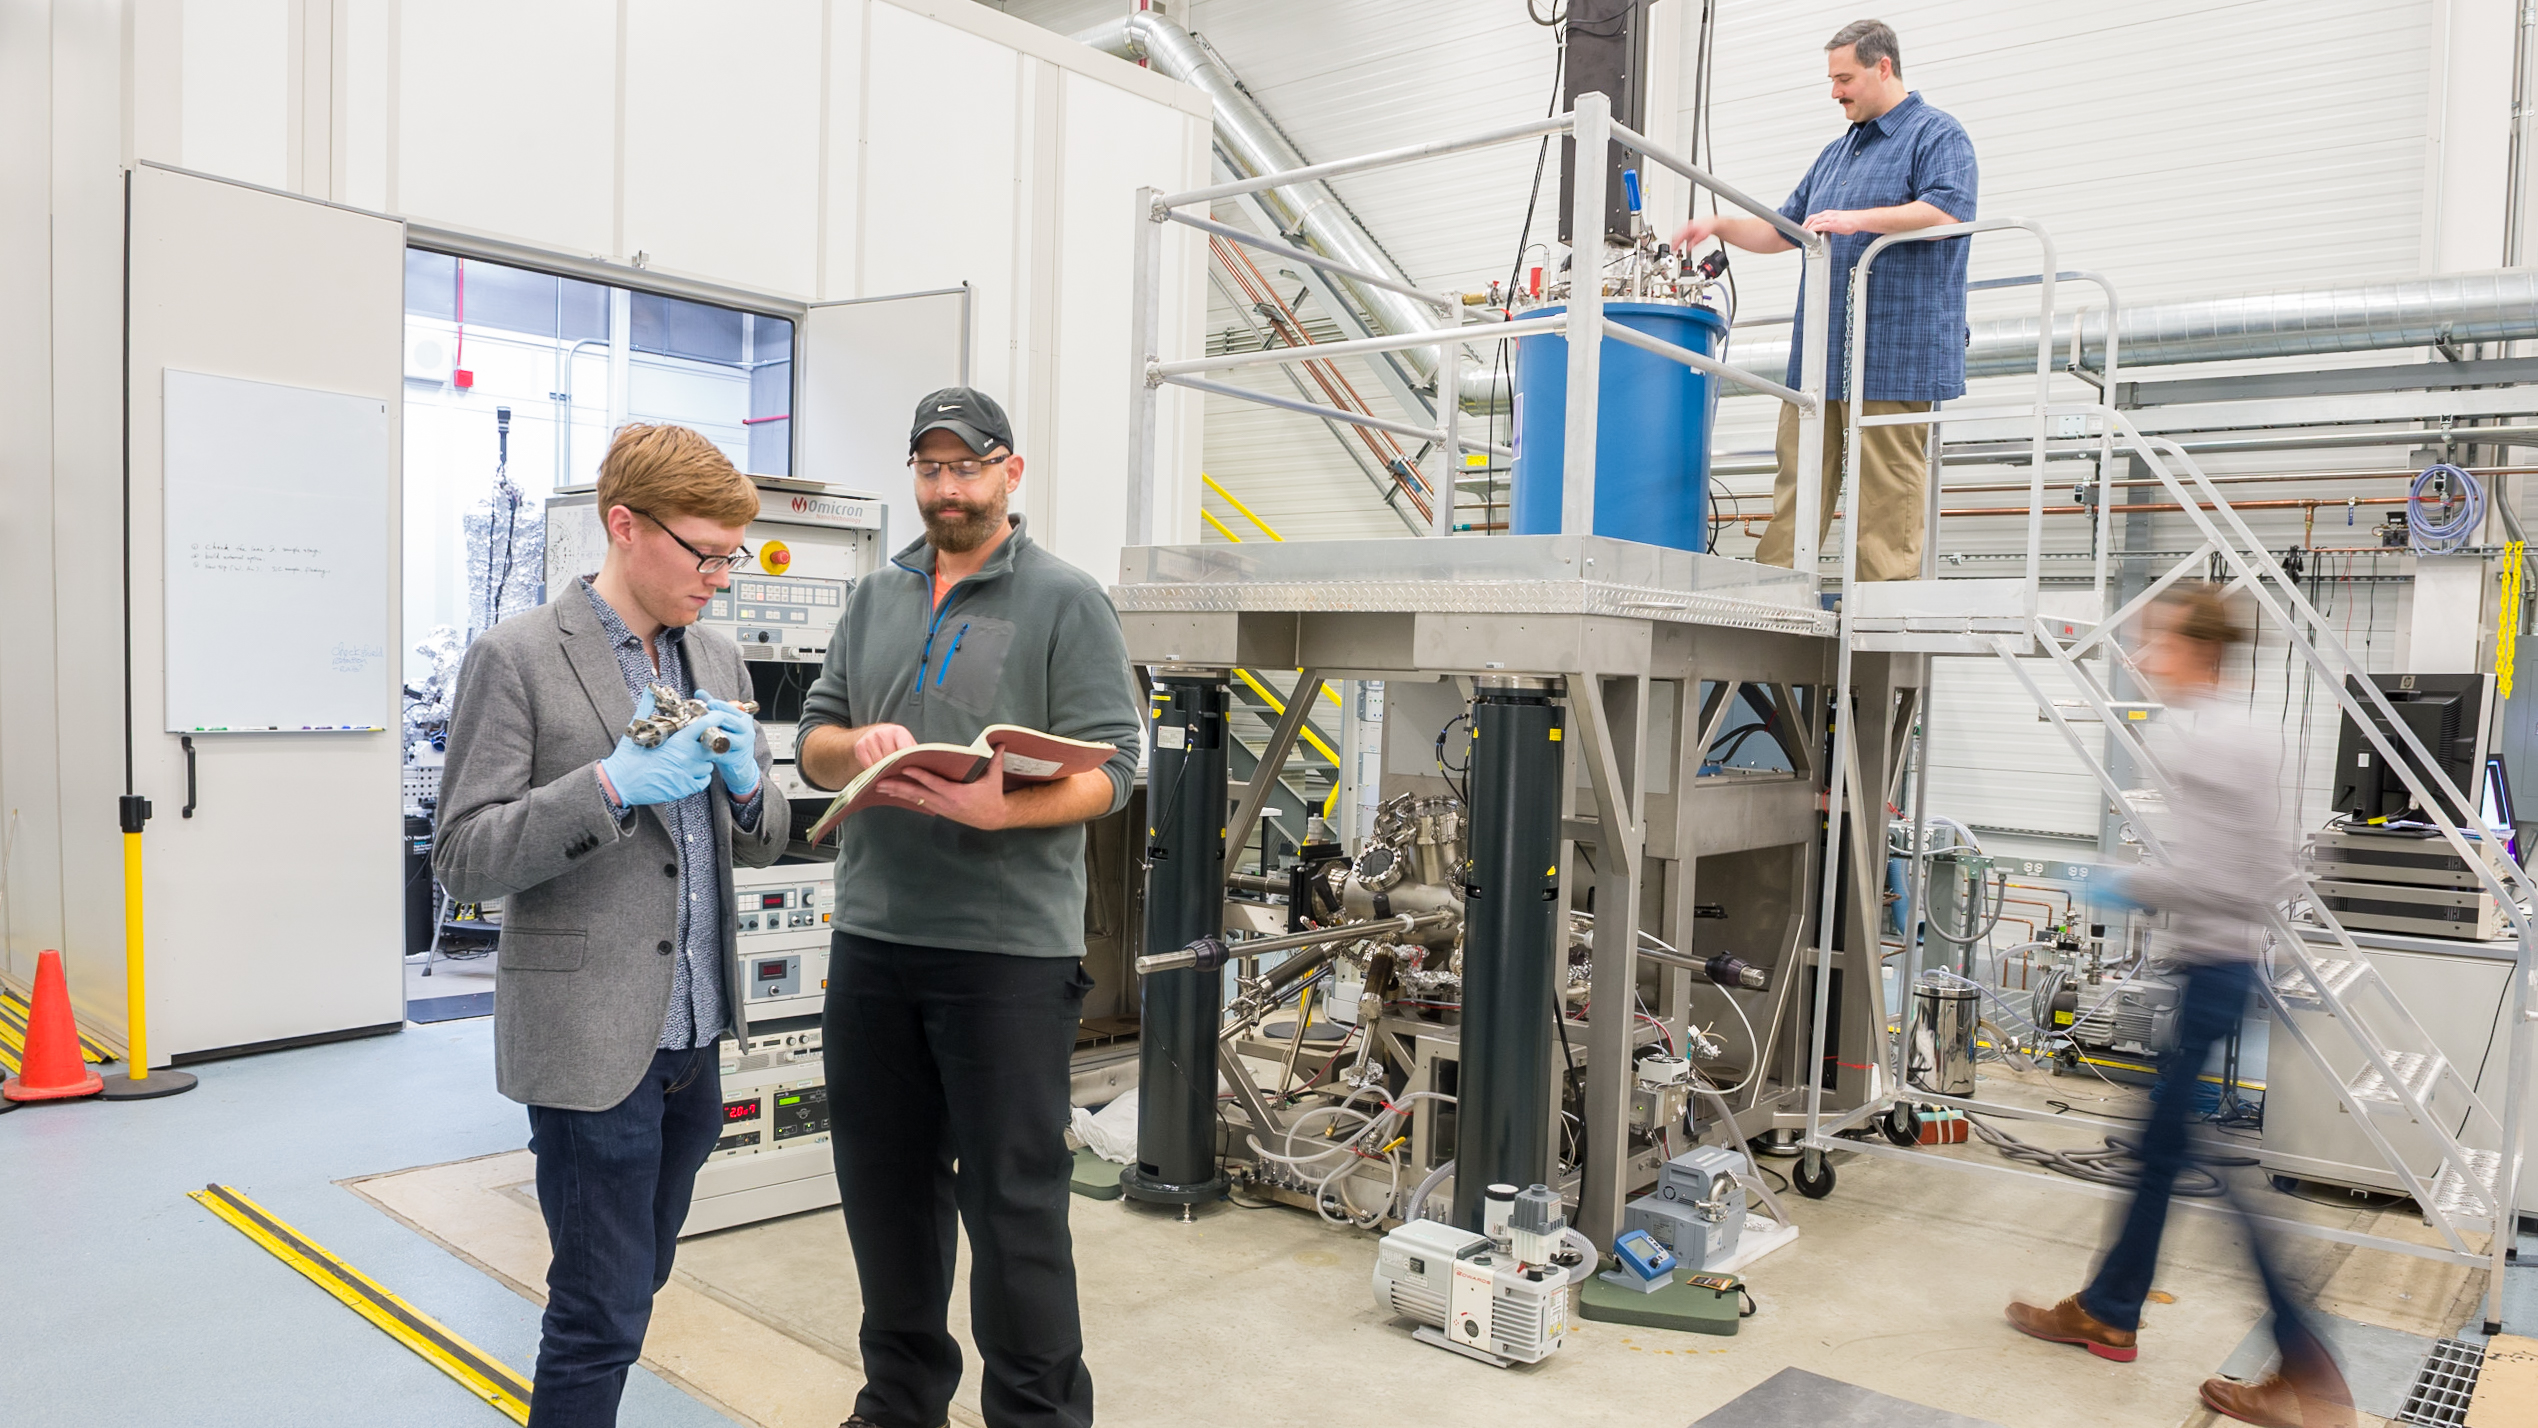 Andrew Mannix and Nathan Guisinger examine a boron evaporator while Brandon Fisher checks cryogen flow settings and Brian Kiraly examines a sample next to a vacuum chamber loadlock at the Center for Nanoscale Materials. Photo by Mark Lopez / Argonne National Laboratory.